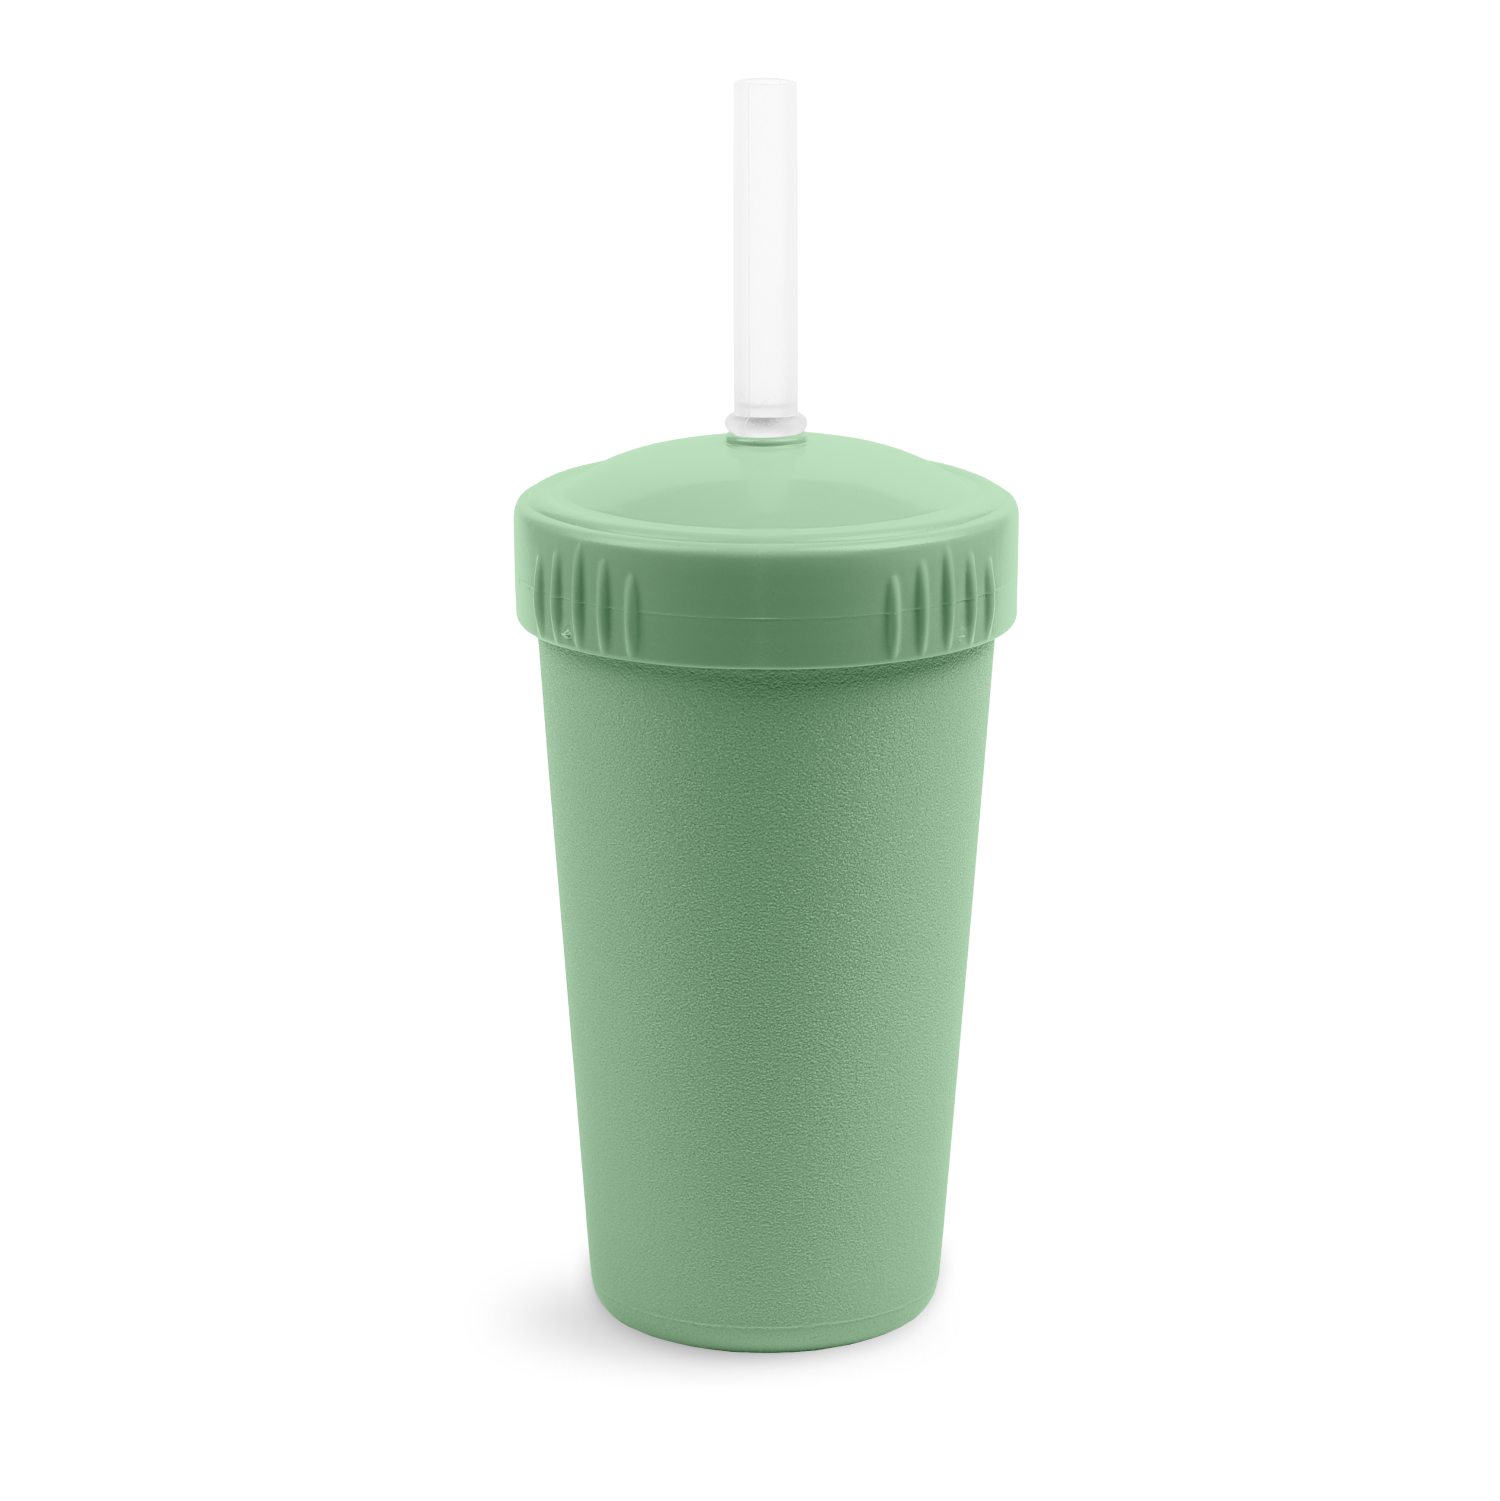 Re Play Made in USA 10 Oz. Straw Cups for Toddlers, Pack of 4 - Reusable  Kids Cups with Straws and L…See more Re Play Made in USA 10 Oz. Straw Cups